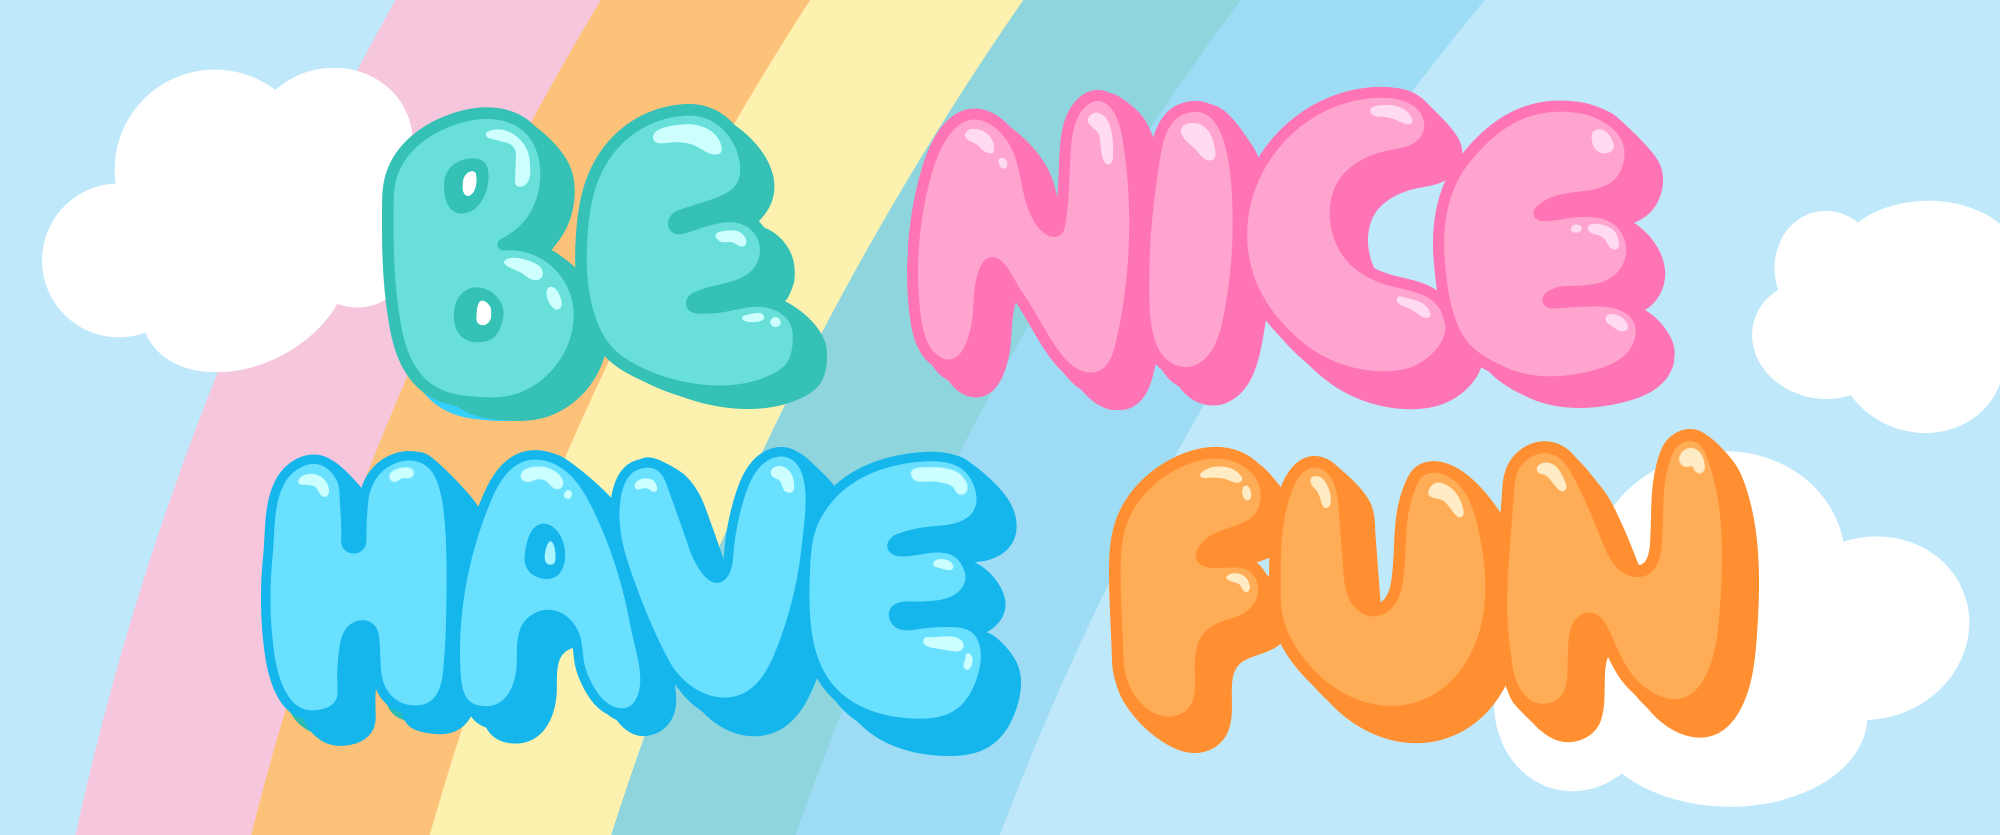 Project thumbnail for Be Nice Have Fun